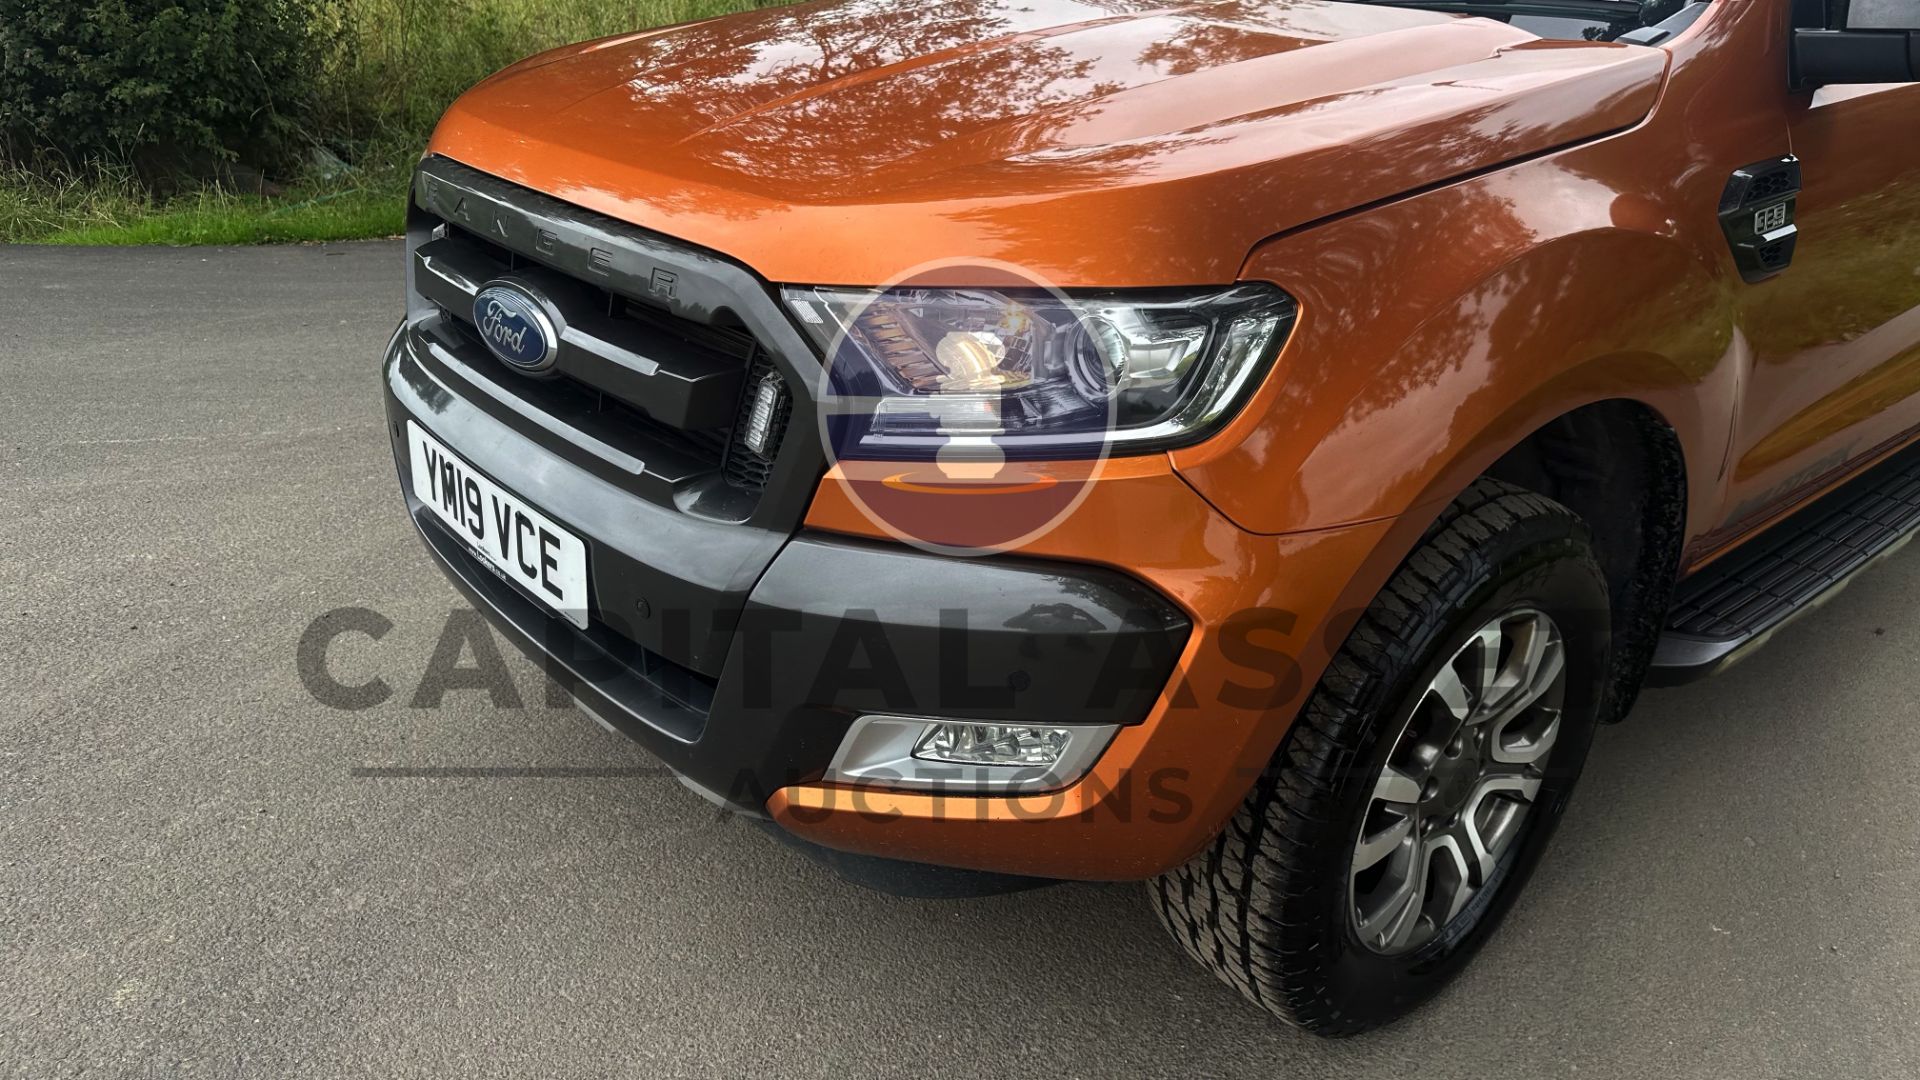 (ON SALE) FORD RANGER *WILDTRAK EDITION* DOUBLE CAB PICK-UP (2019 - EURO 6) 3.2 TDCI - AUTOMATIC - Image 17 of 53